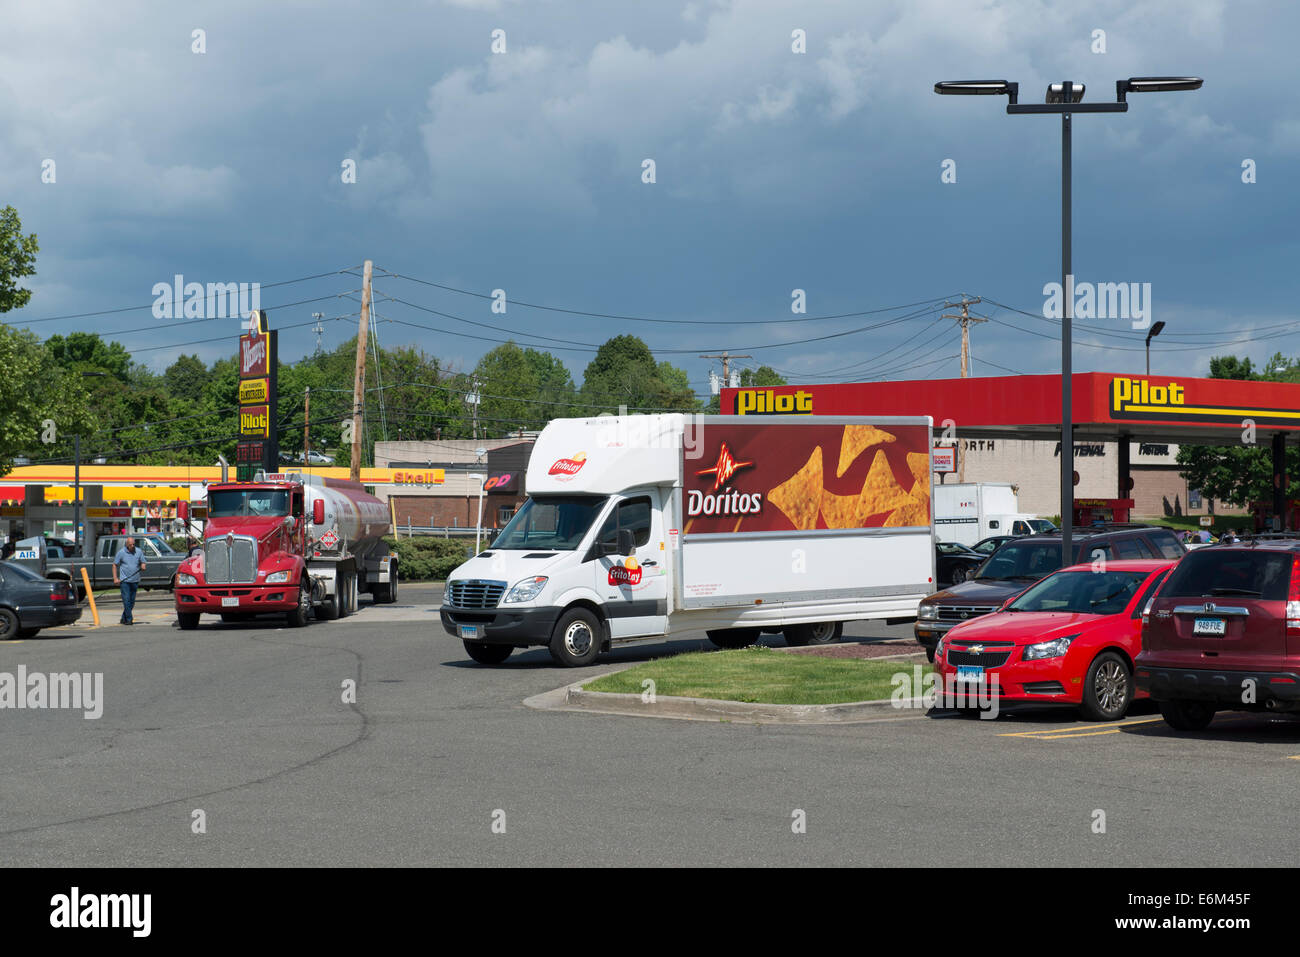 Pilot Travel Centers Truck Stop, Milford, CT. Stockfoto